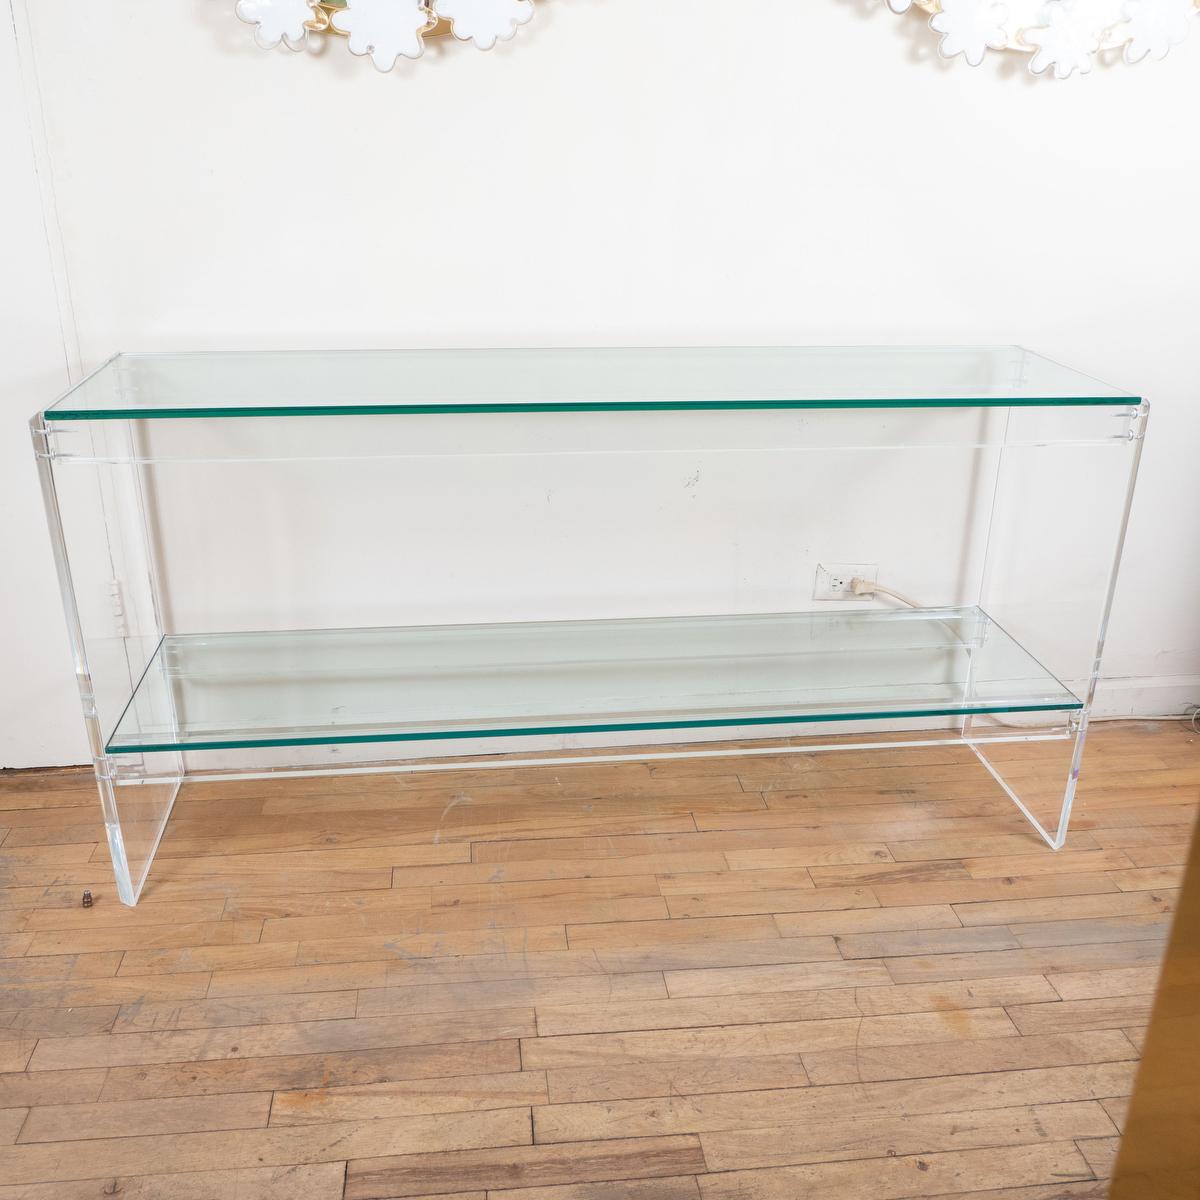 Rectangular Lucite two tier console with glass shelves.